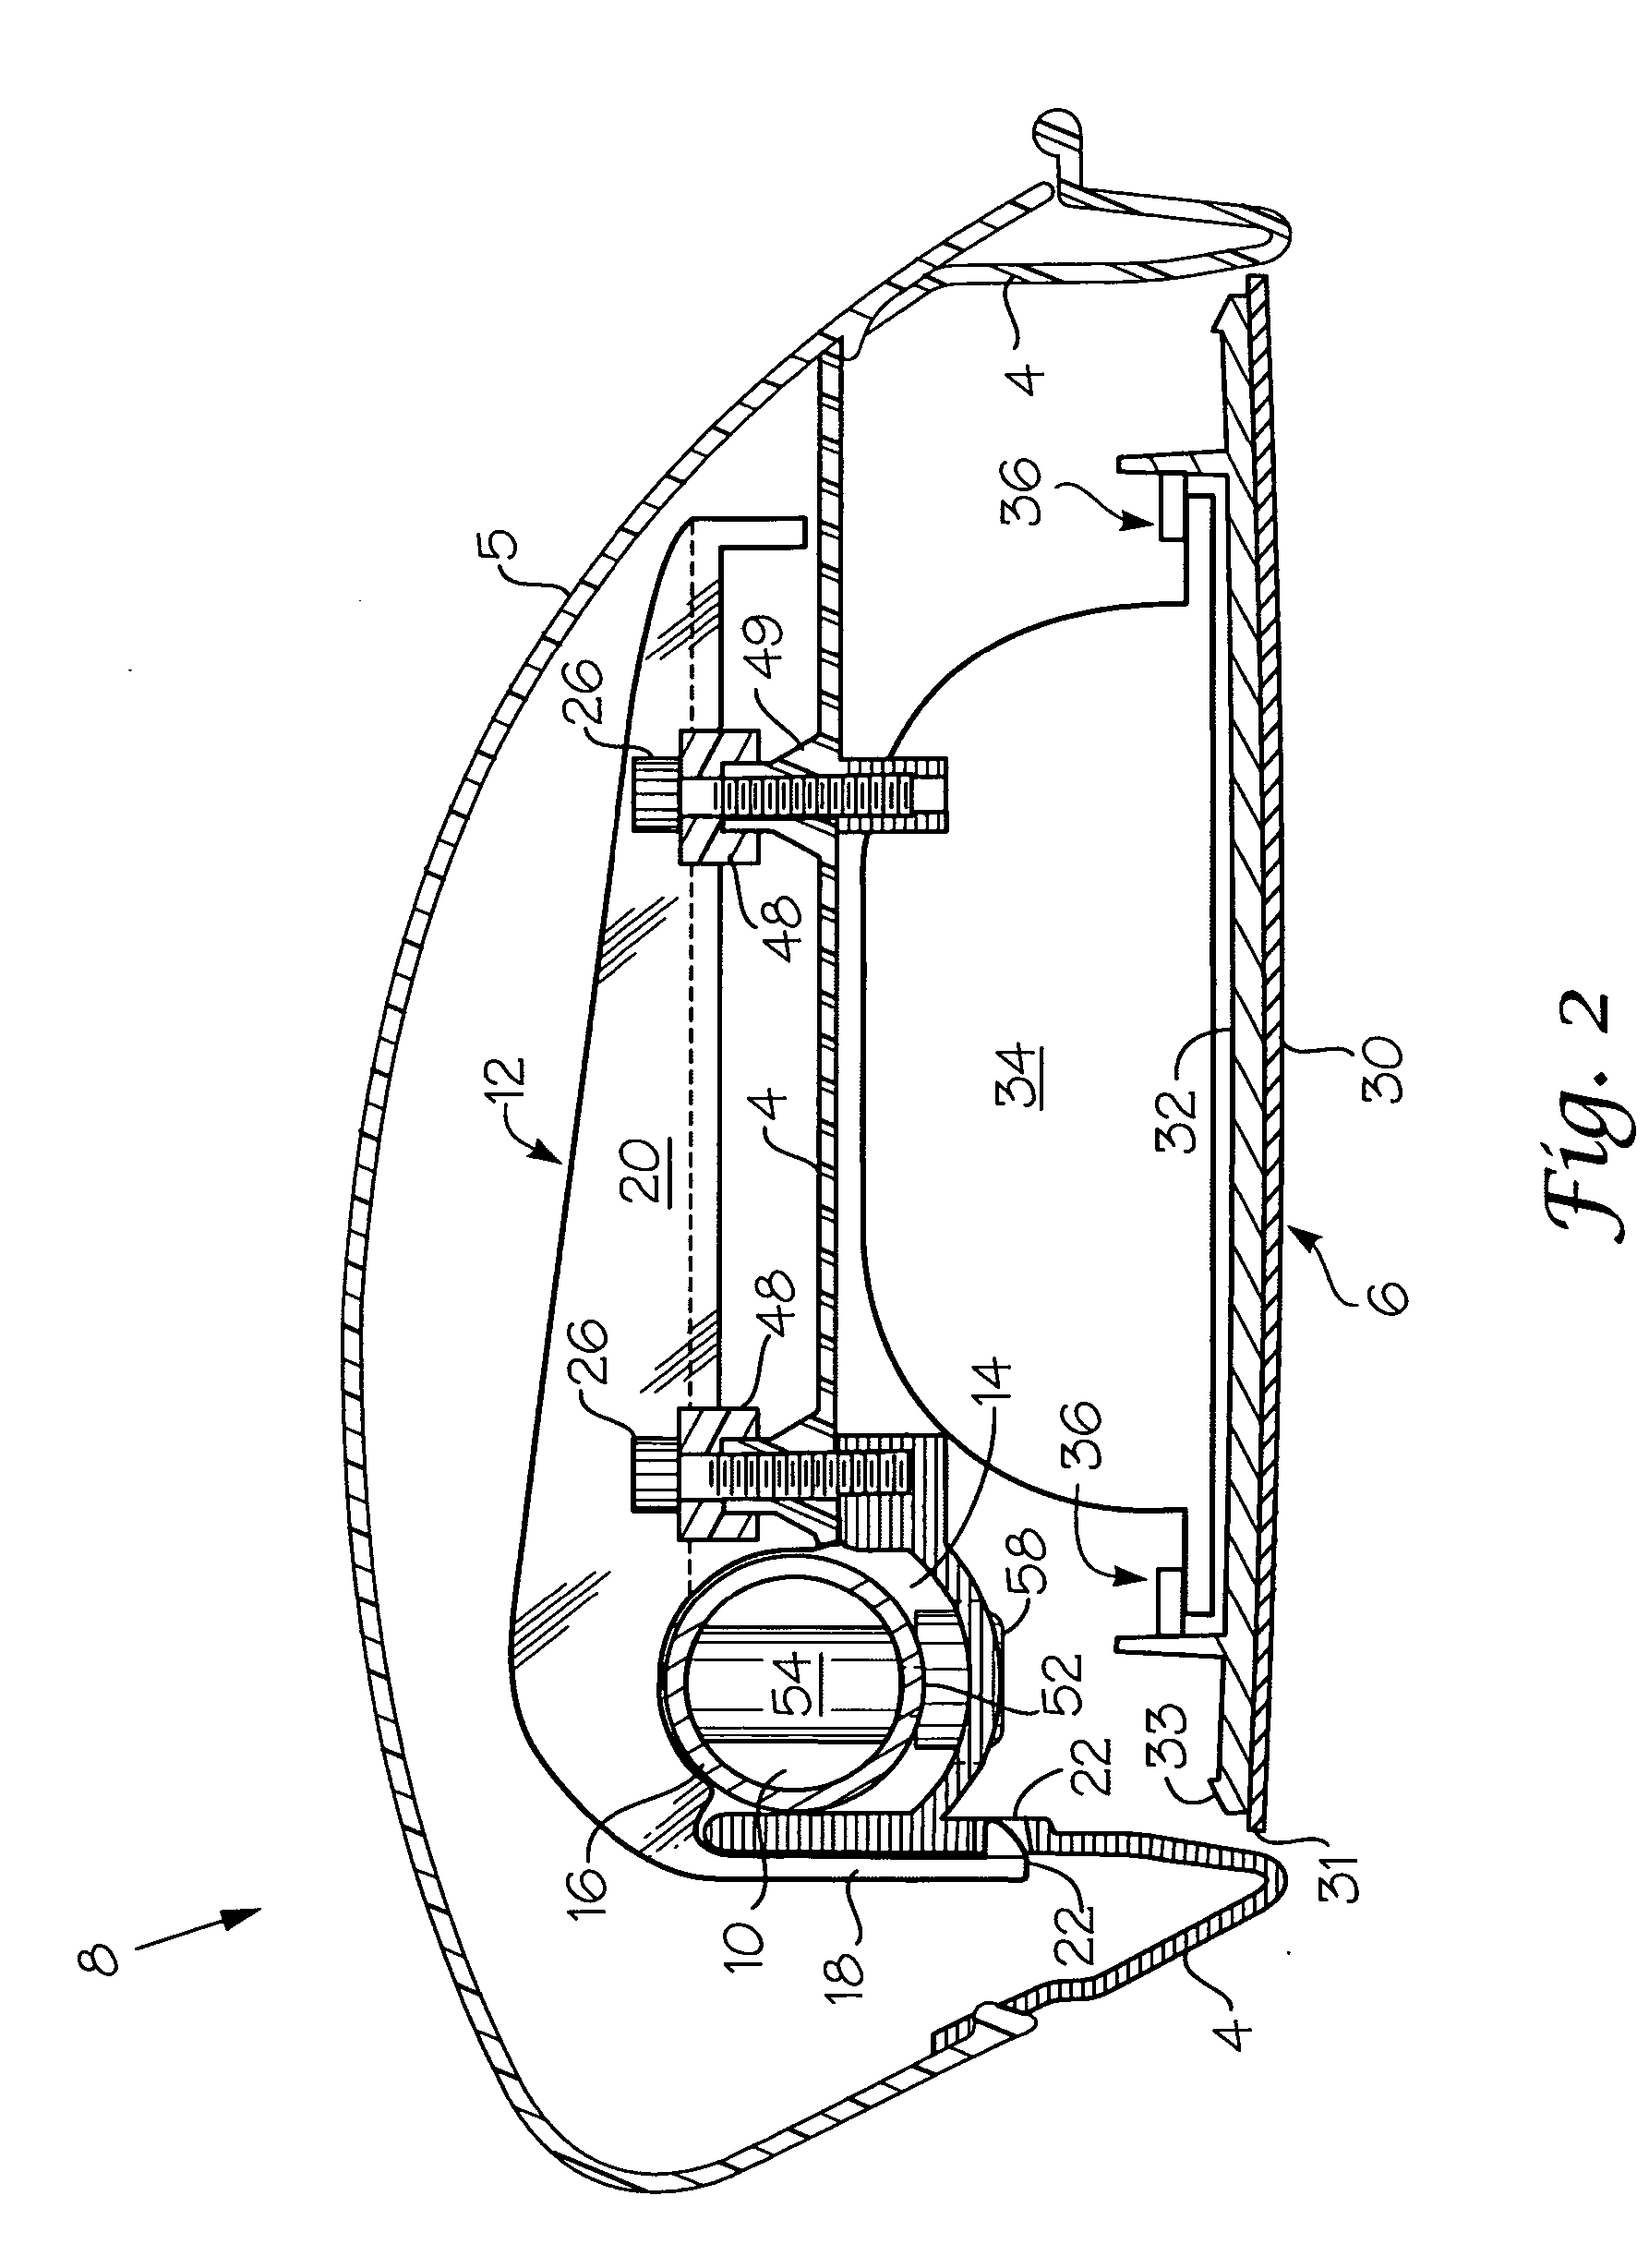 Rearview mirror assembly for motor vehicles